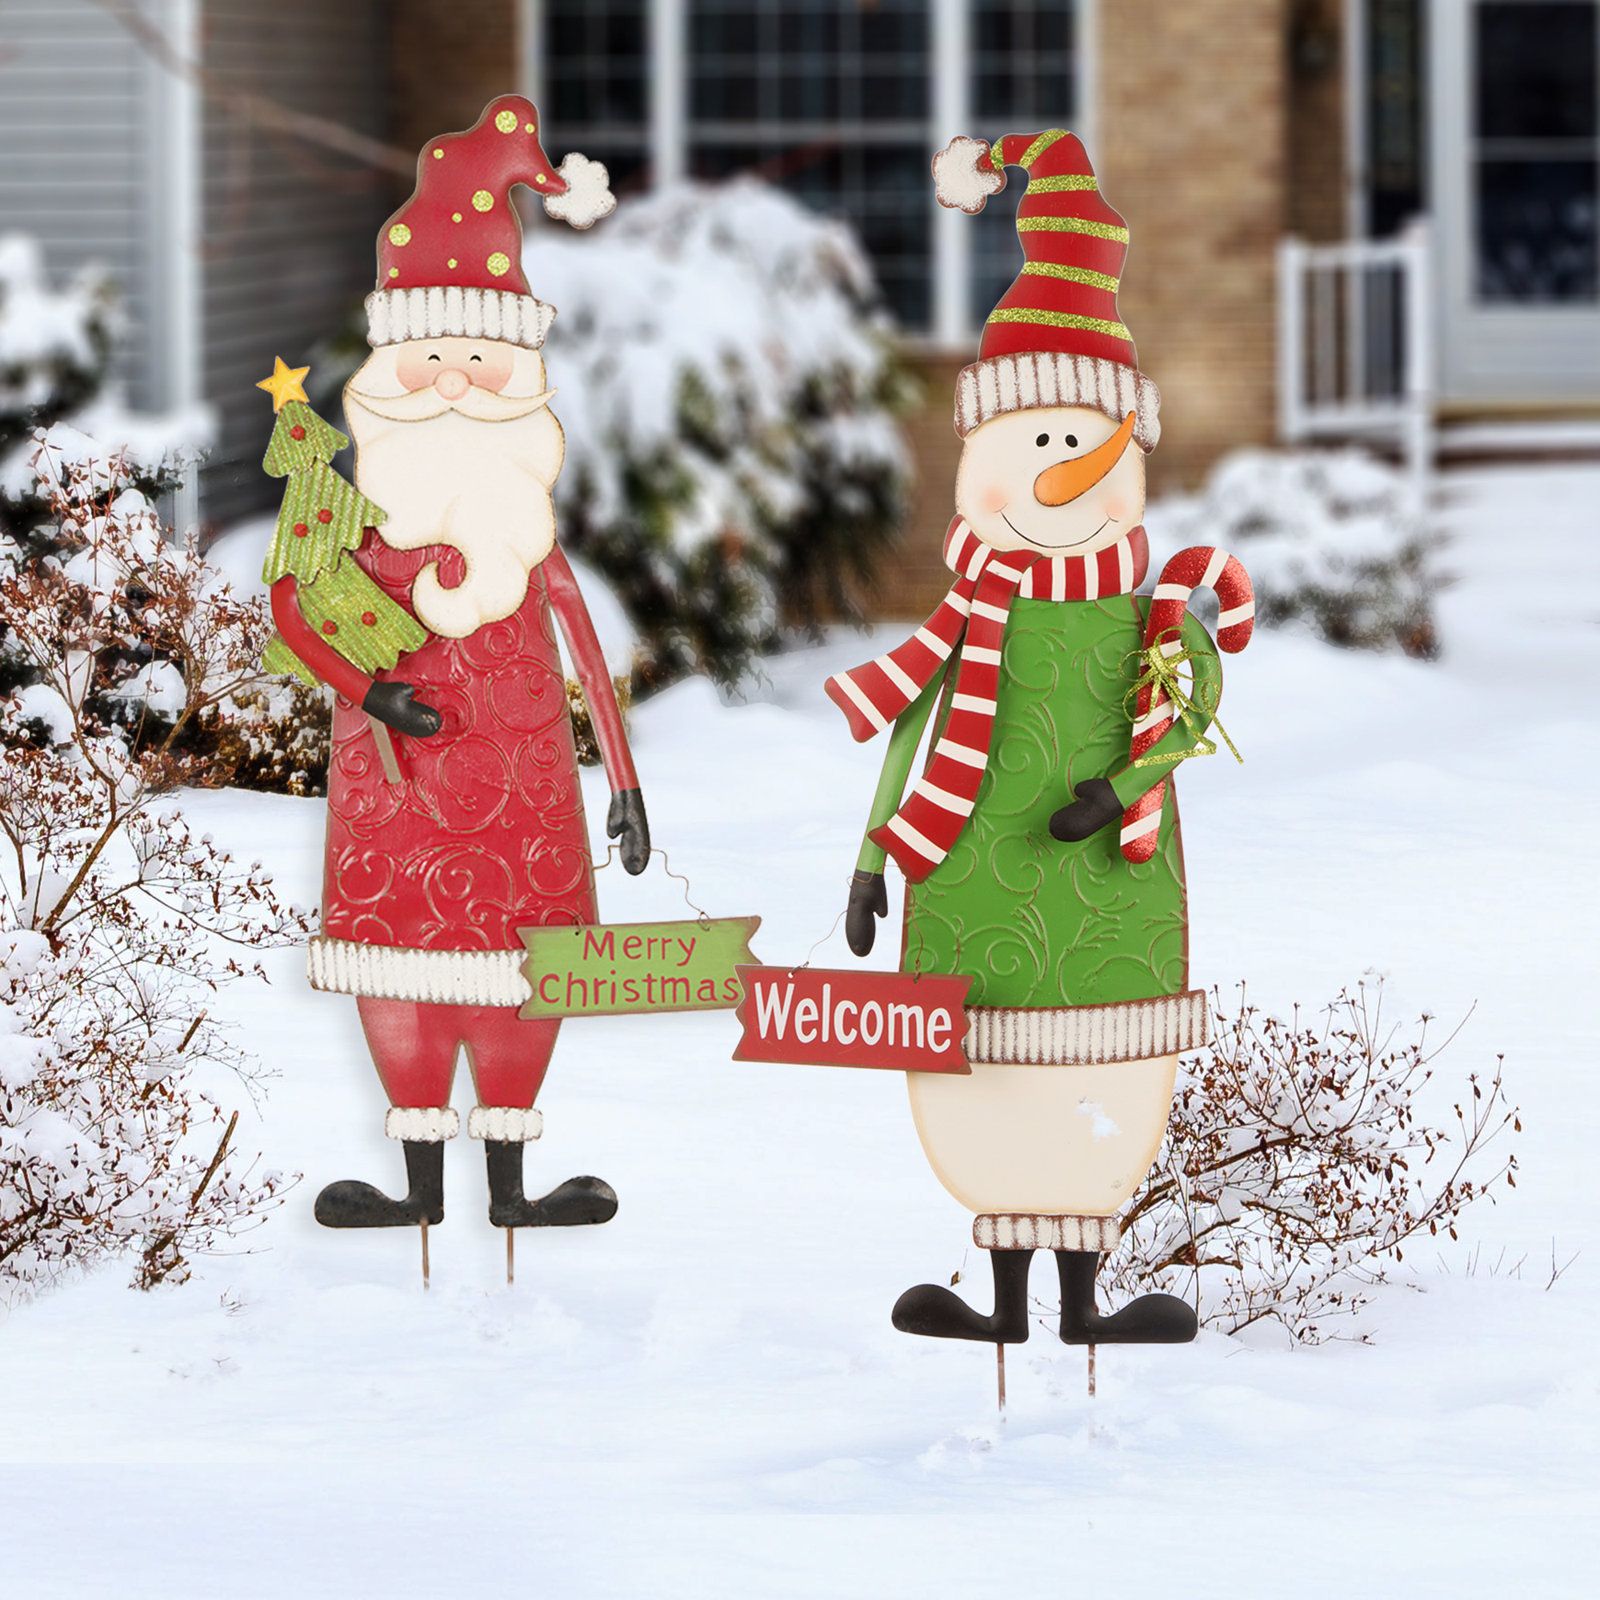 The Best Outdoor Christmas Decorations for Under $50